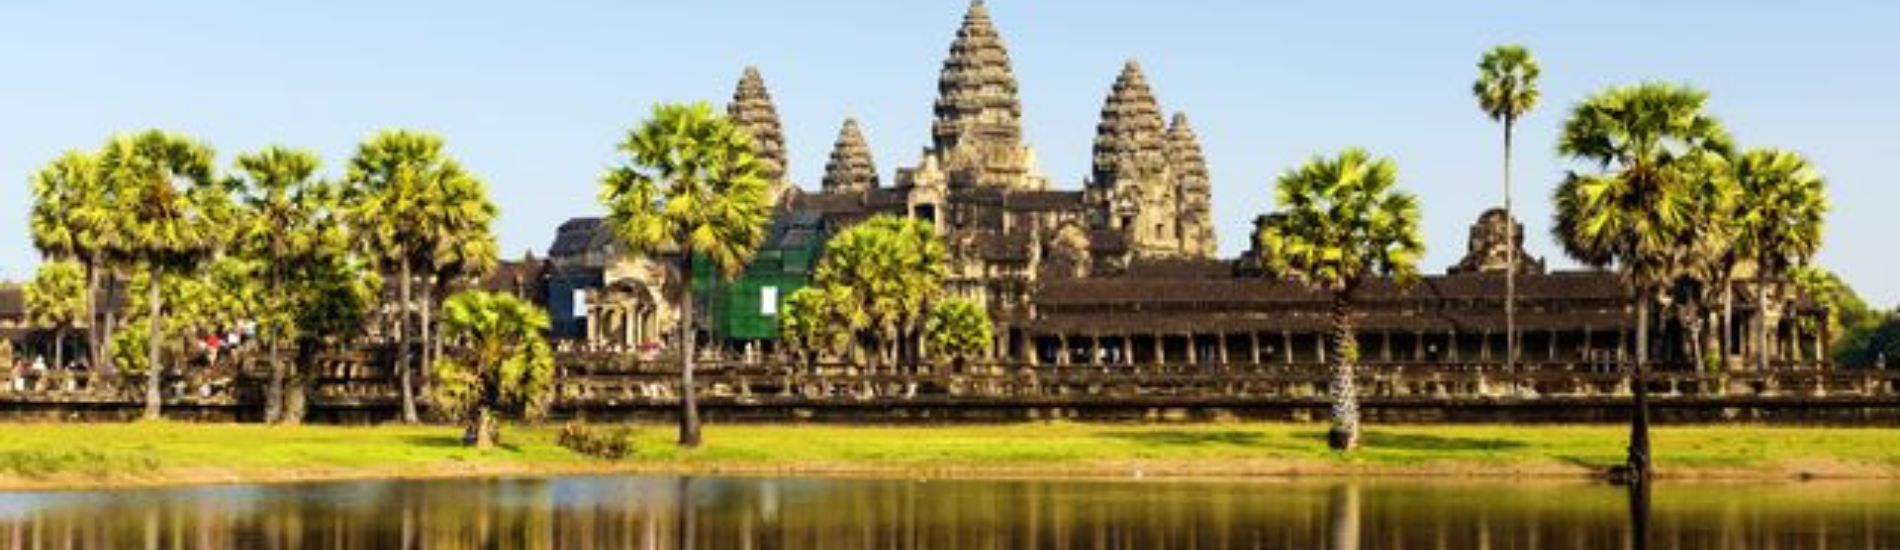 4-day tour in Cambodia from Phnom Penh